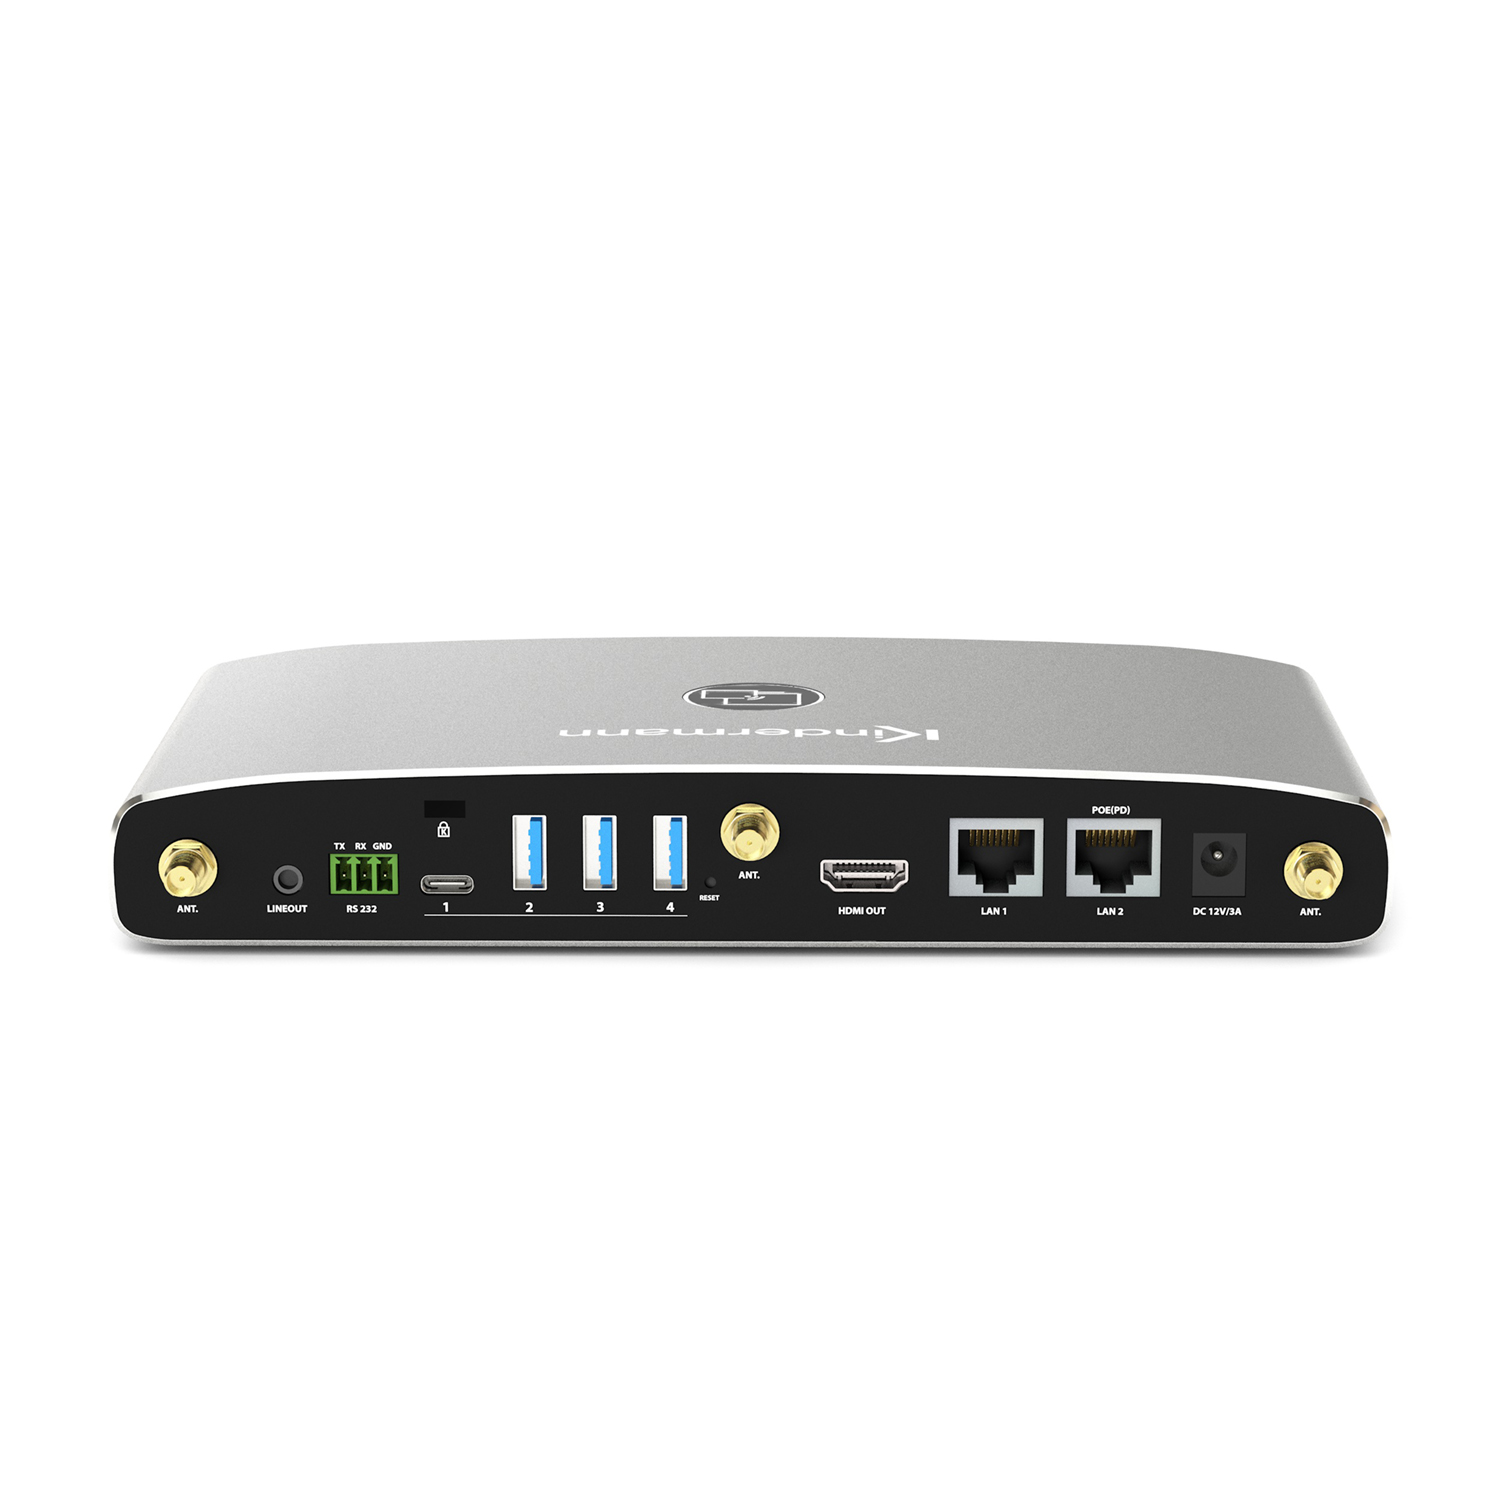 Kindermann KLICK+SHOW K-FX HDMI Kit - wireless conference room system with 2 x HDMI dongles - BYOM